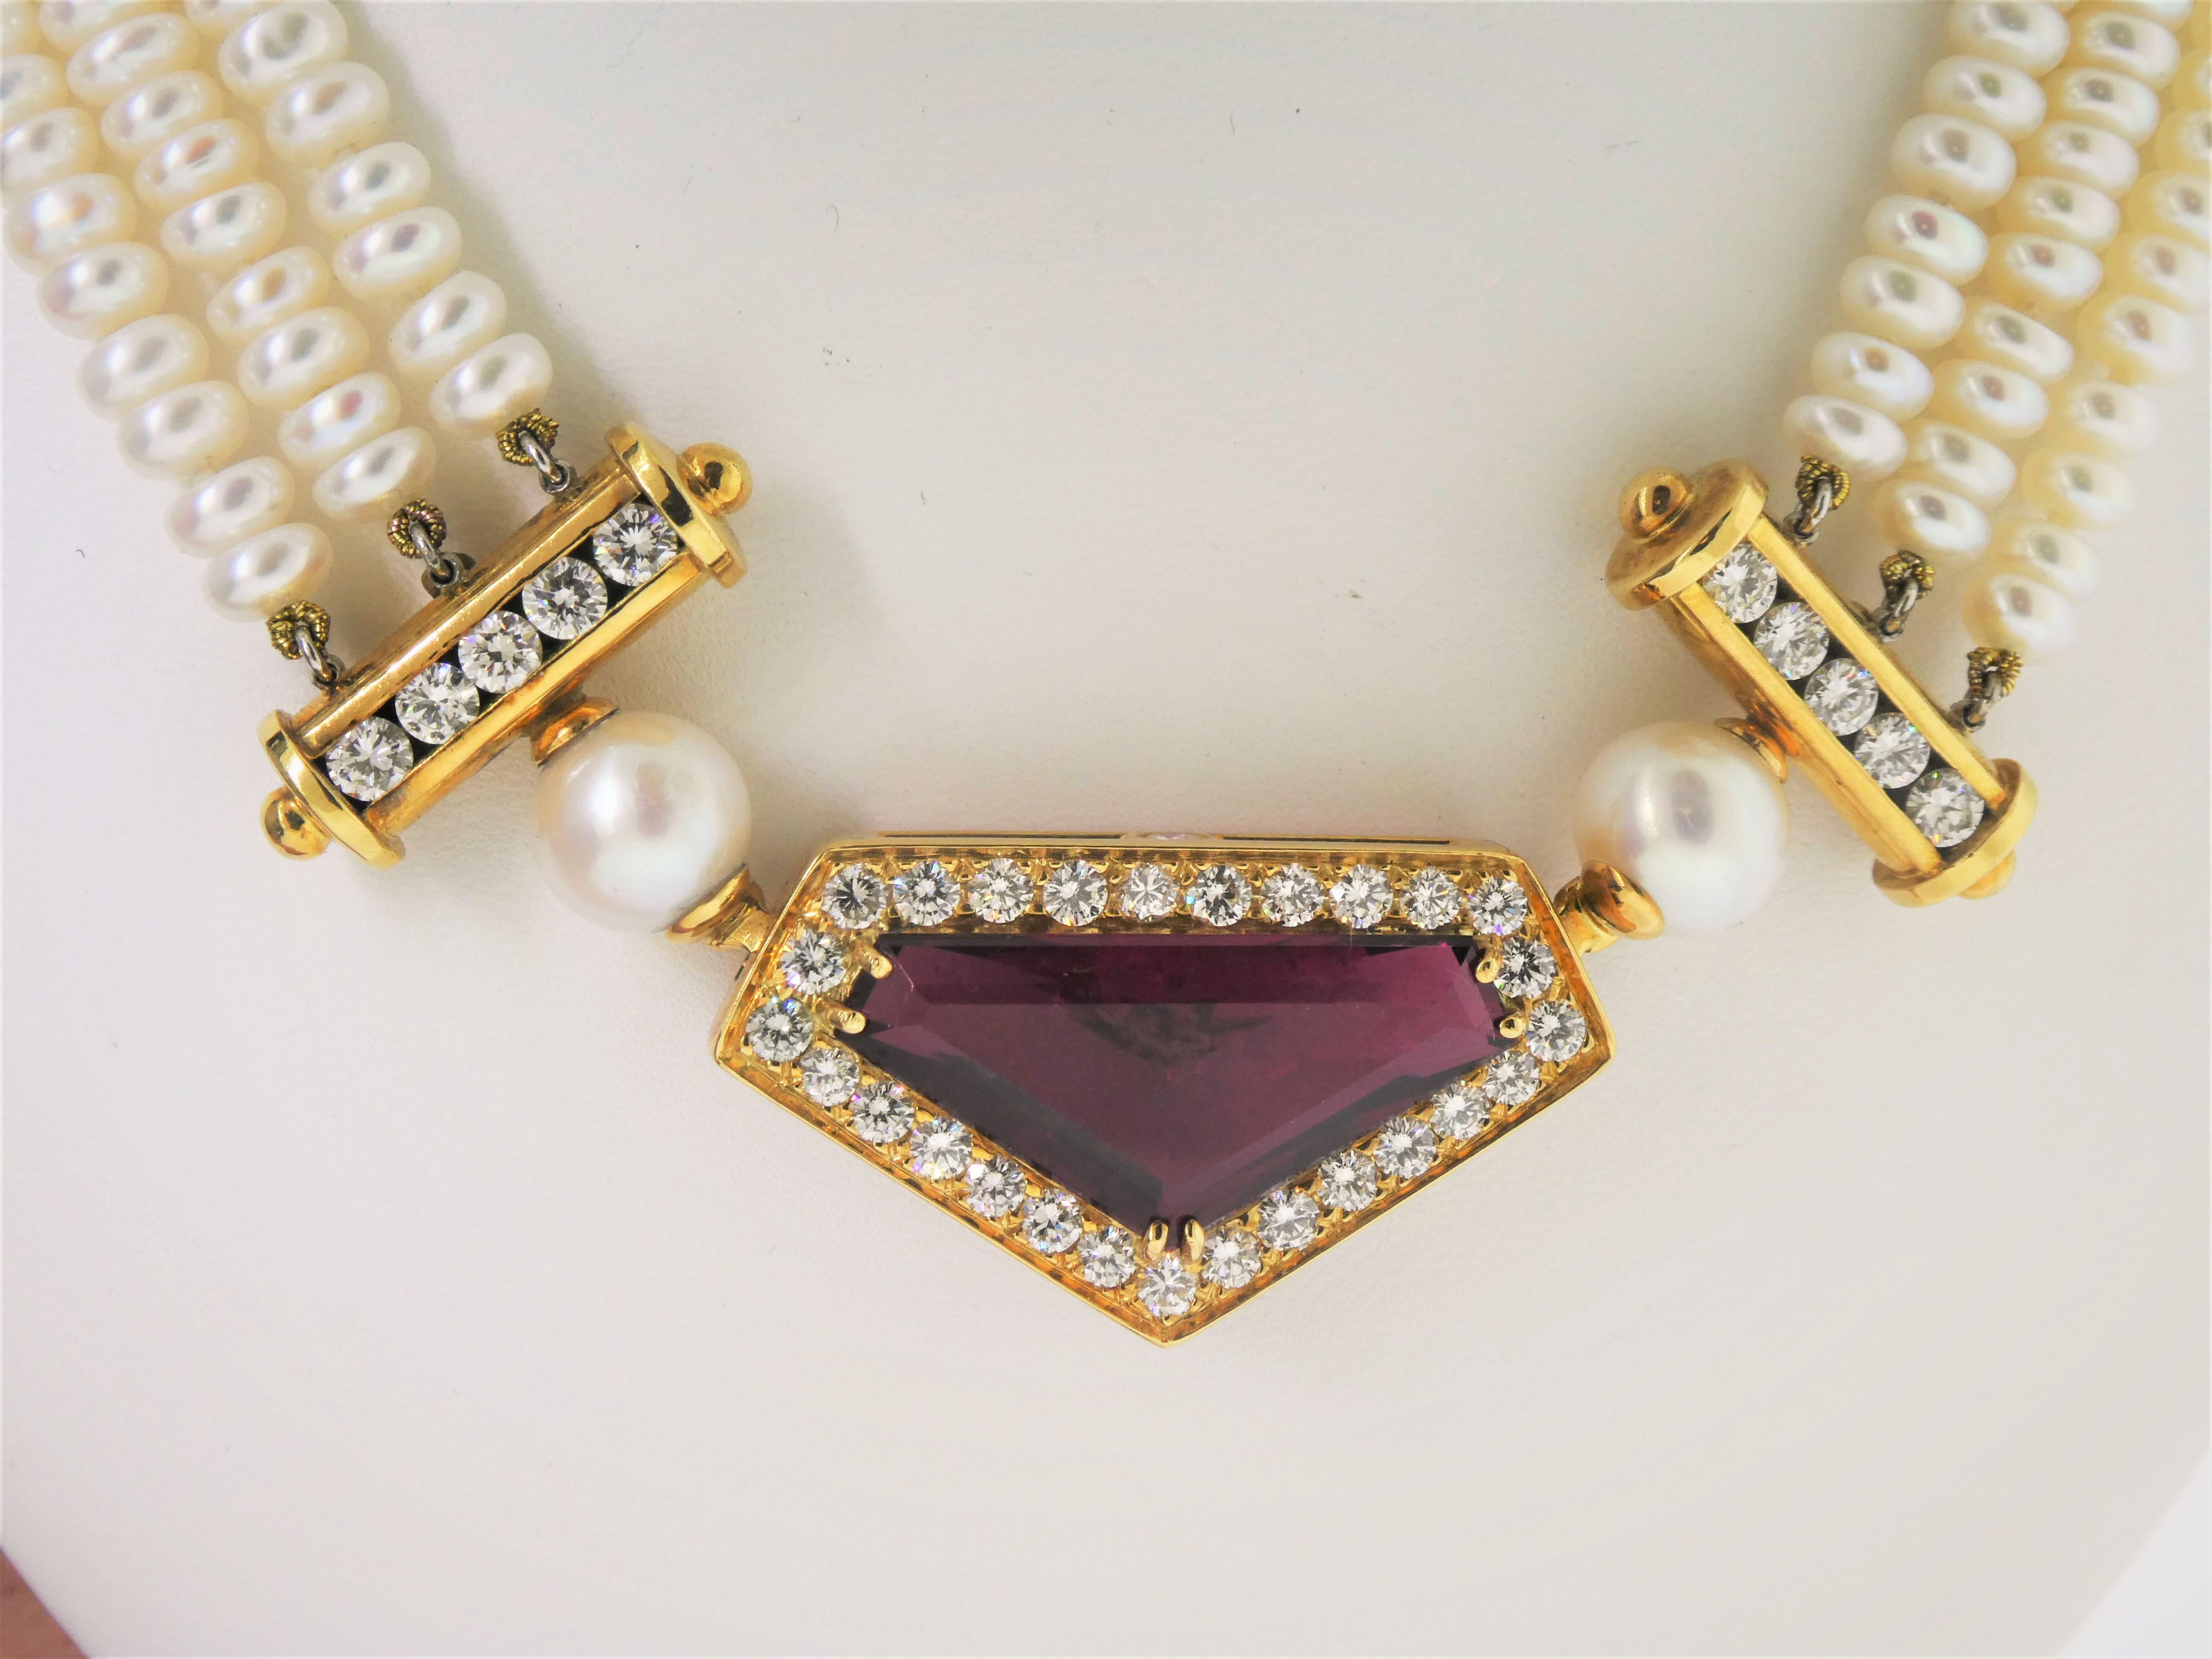 Sitting in an 18 karat gold mounting, surrounded by a row of diamonds (1.38 carats), this pendant sits on three strands of button pearls joined by diamond bars (1.10 carats) on either side.  Designed by Michael Engelhardt,  the necklace contains an